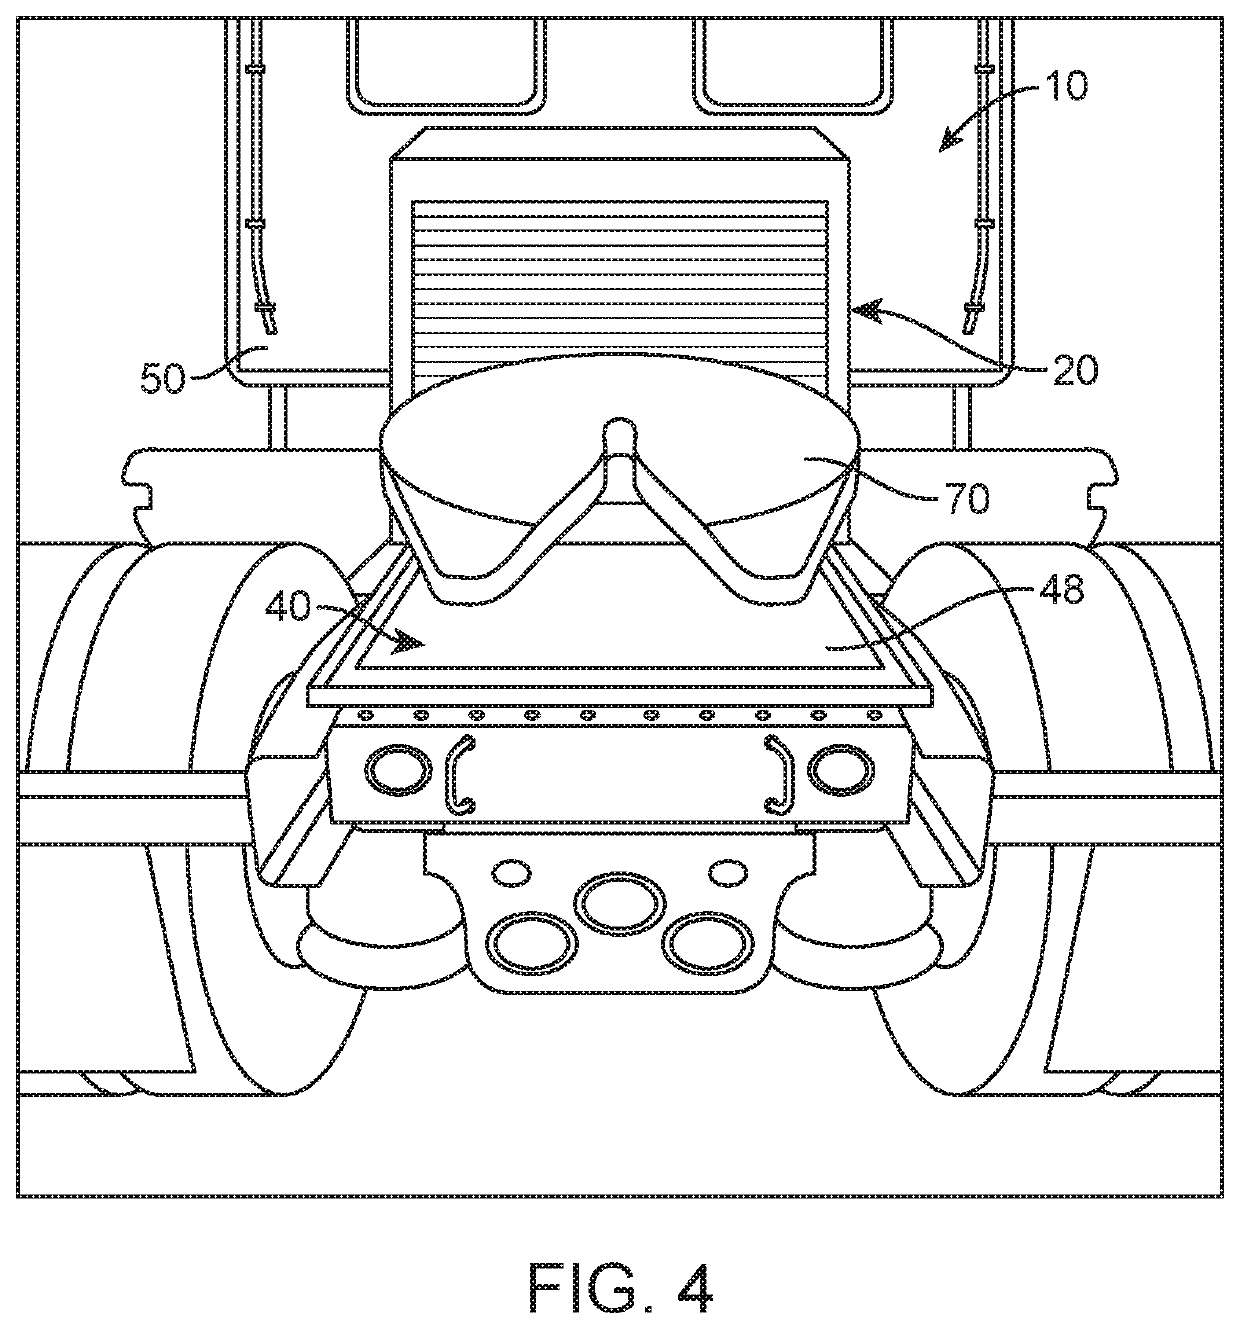 Fifth-wheel receiver cover